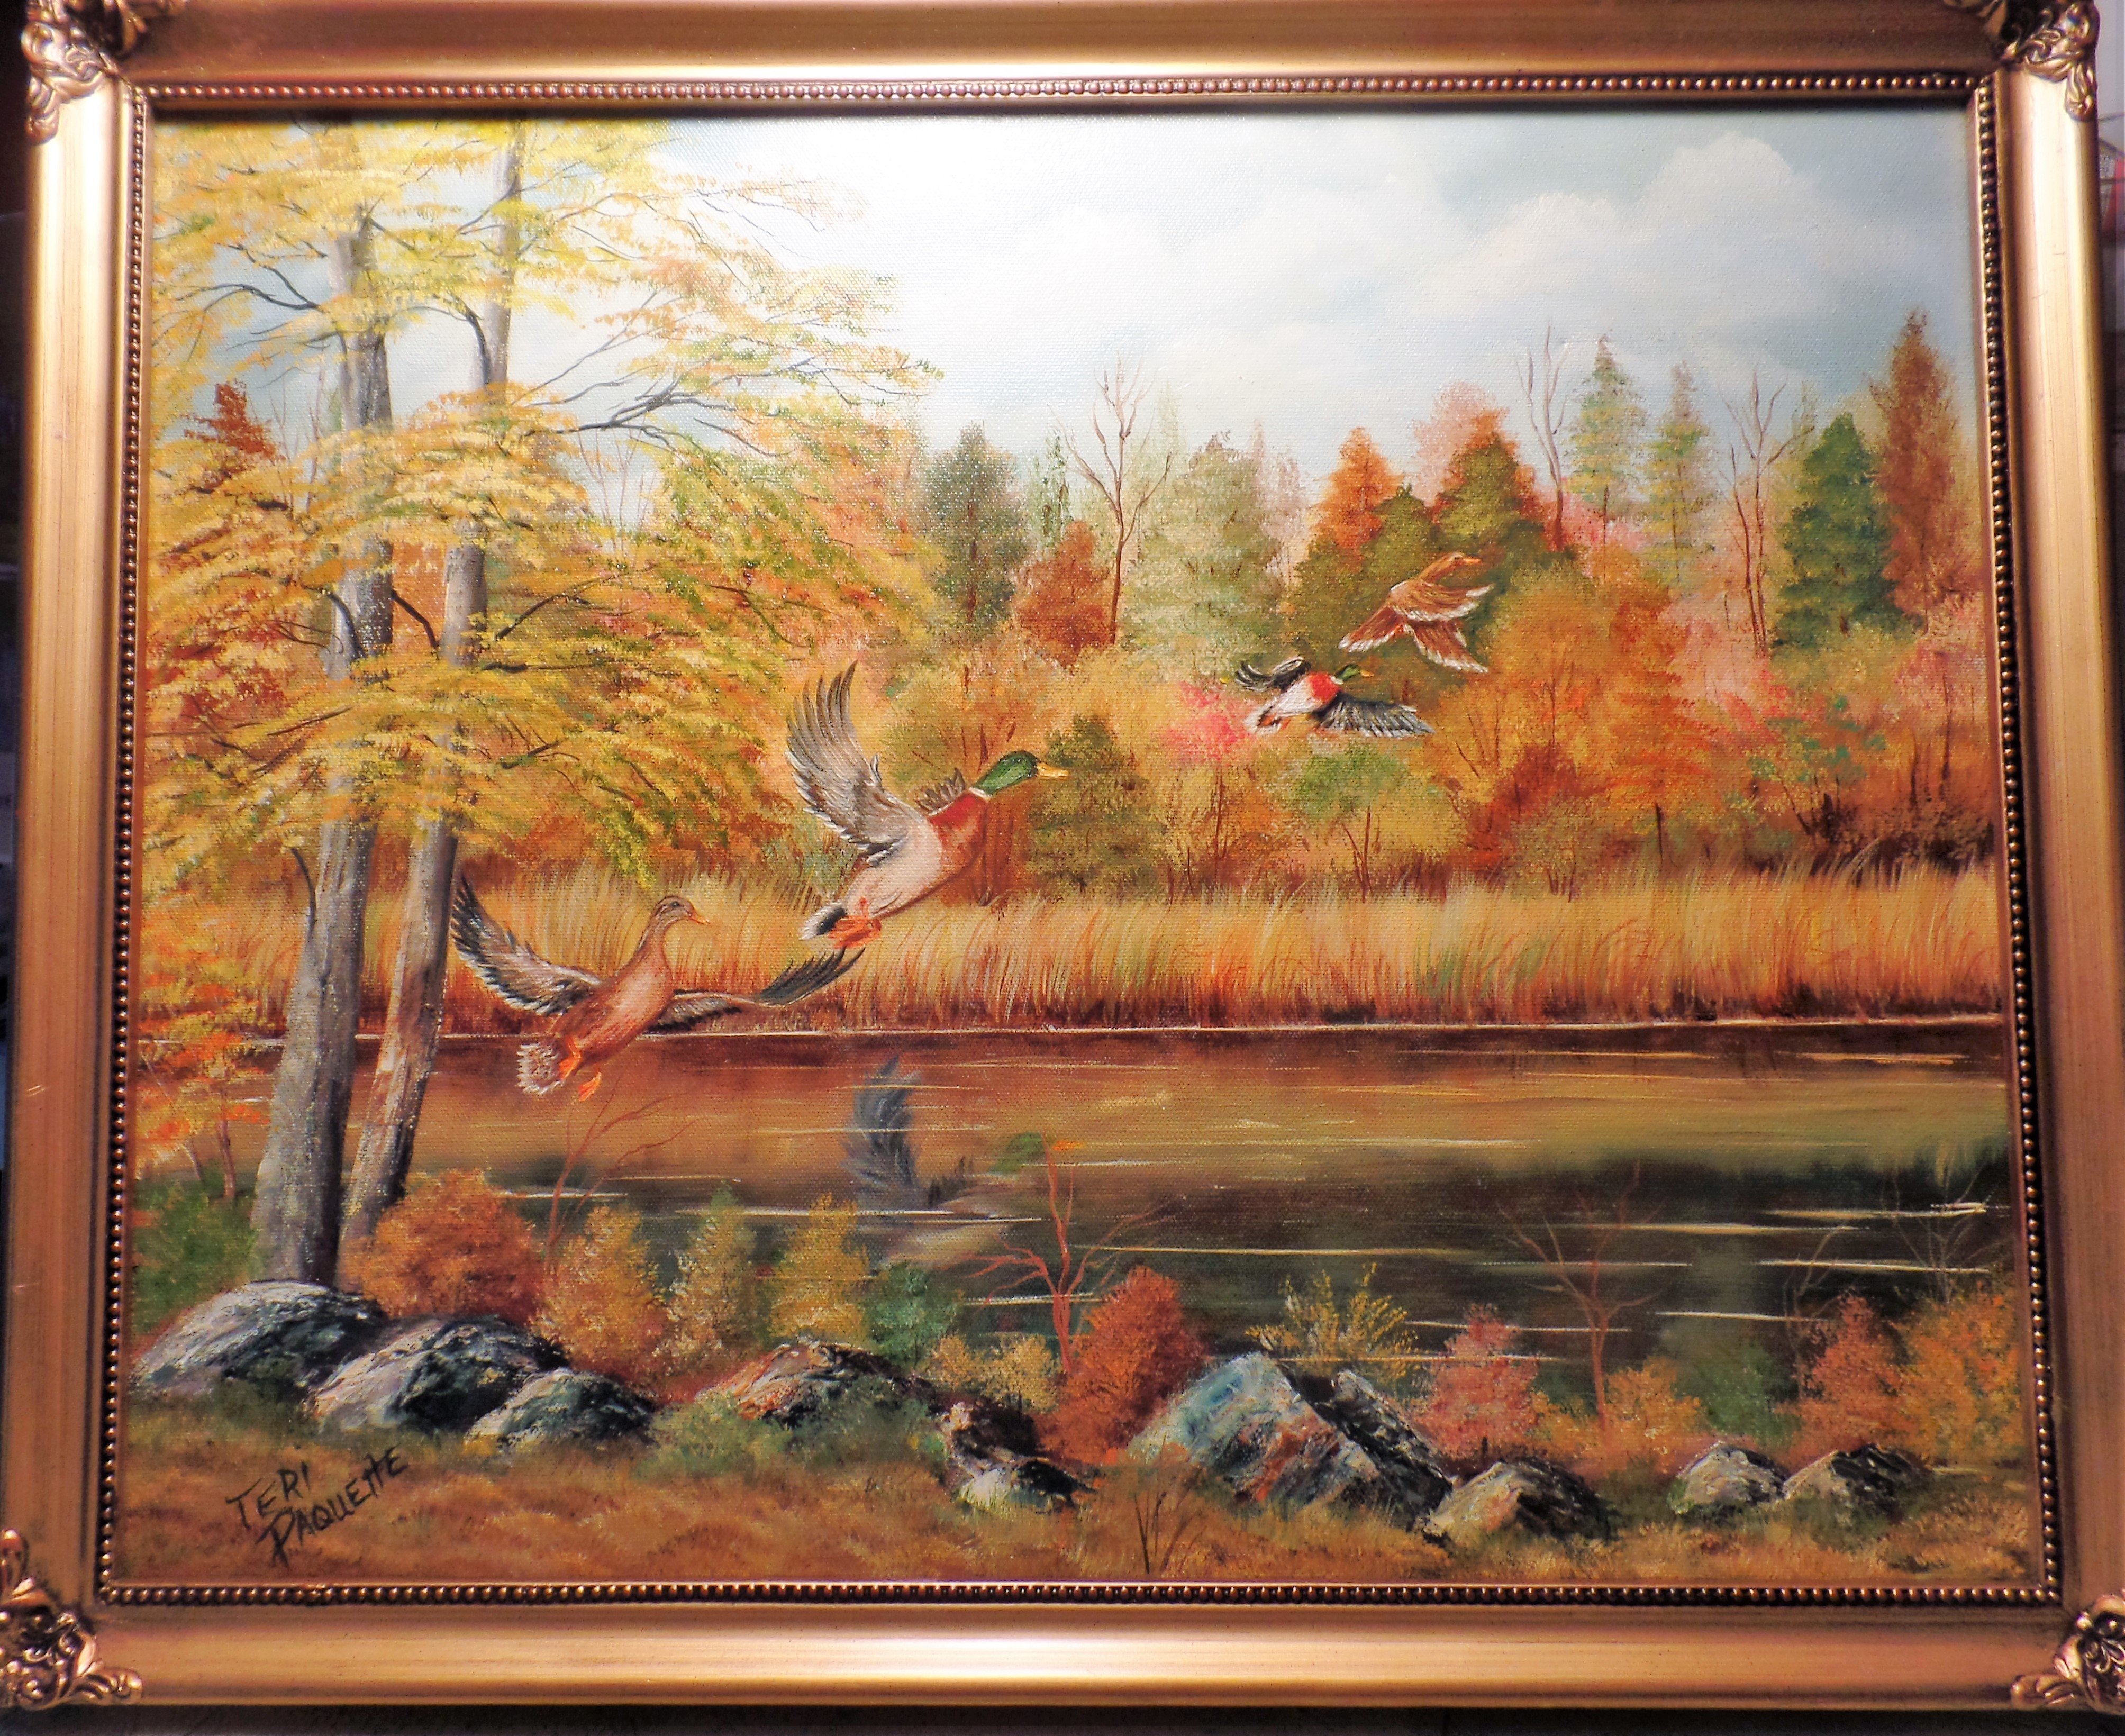 Teri Paquette: 'mallards in flight', 2019 Oil Painting, Landscape. I OFTEN TAKE LONG WALKS AND THIS SIGHT WAS A WELCOME SIGHT- IT IS AN ORIGINAL OIL PAINTING IN A ORNATE GOLD FRAME- SIGNED...